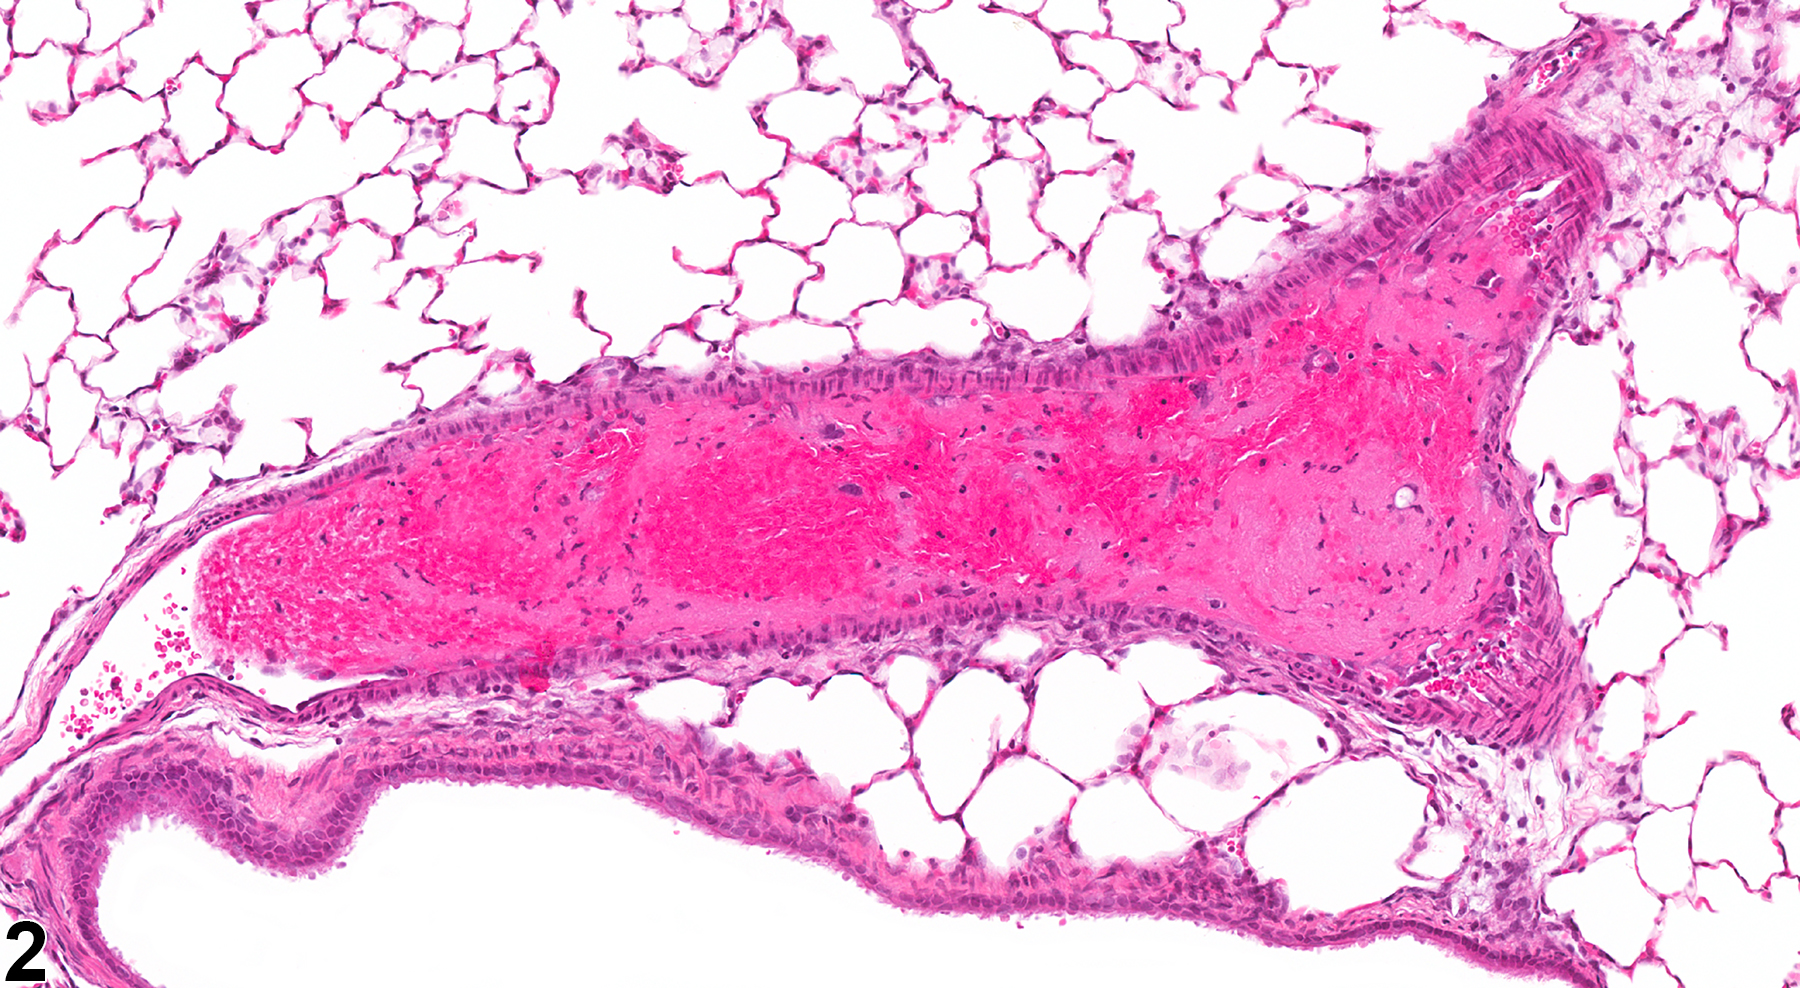 Image of thrombus in the blood vessel from a female F344/N rat in a subchronic study